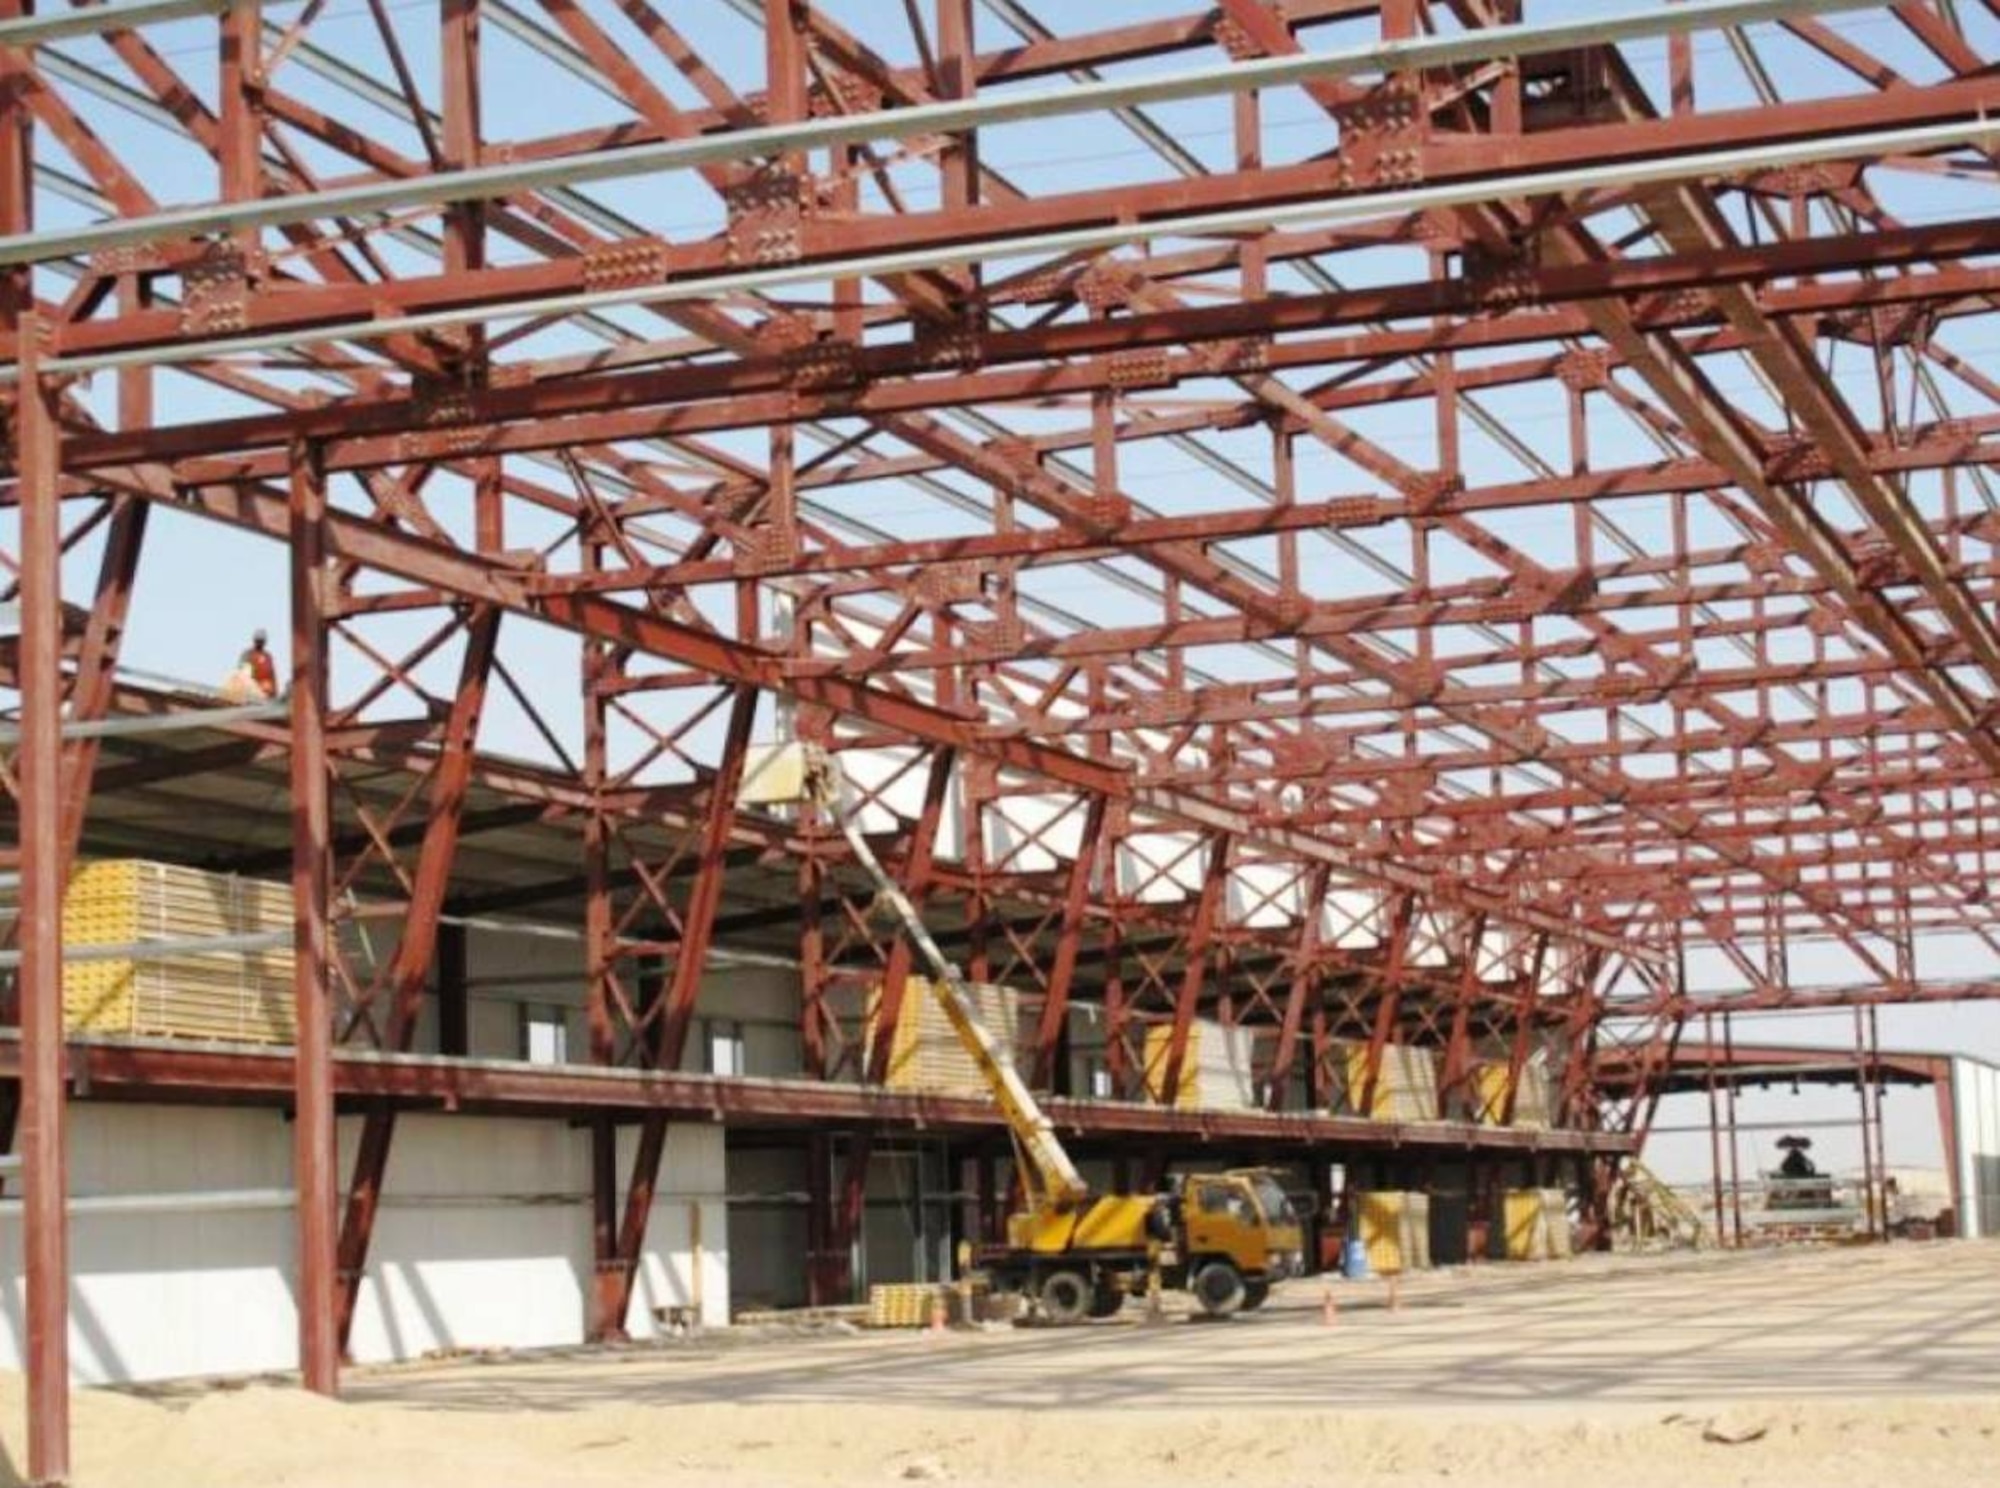 An Iraqi construction crew unloads pallets of equipment for the aircraft maintenance hangar in Taji.  The massive aircraft hangar is a $9.8 million project that began in 2009. (Courtesy photo)